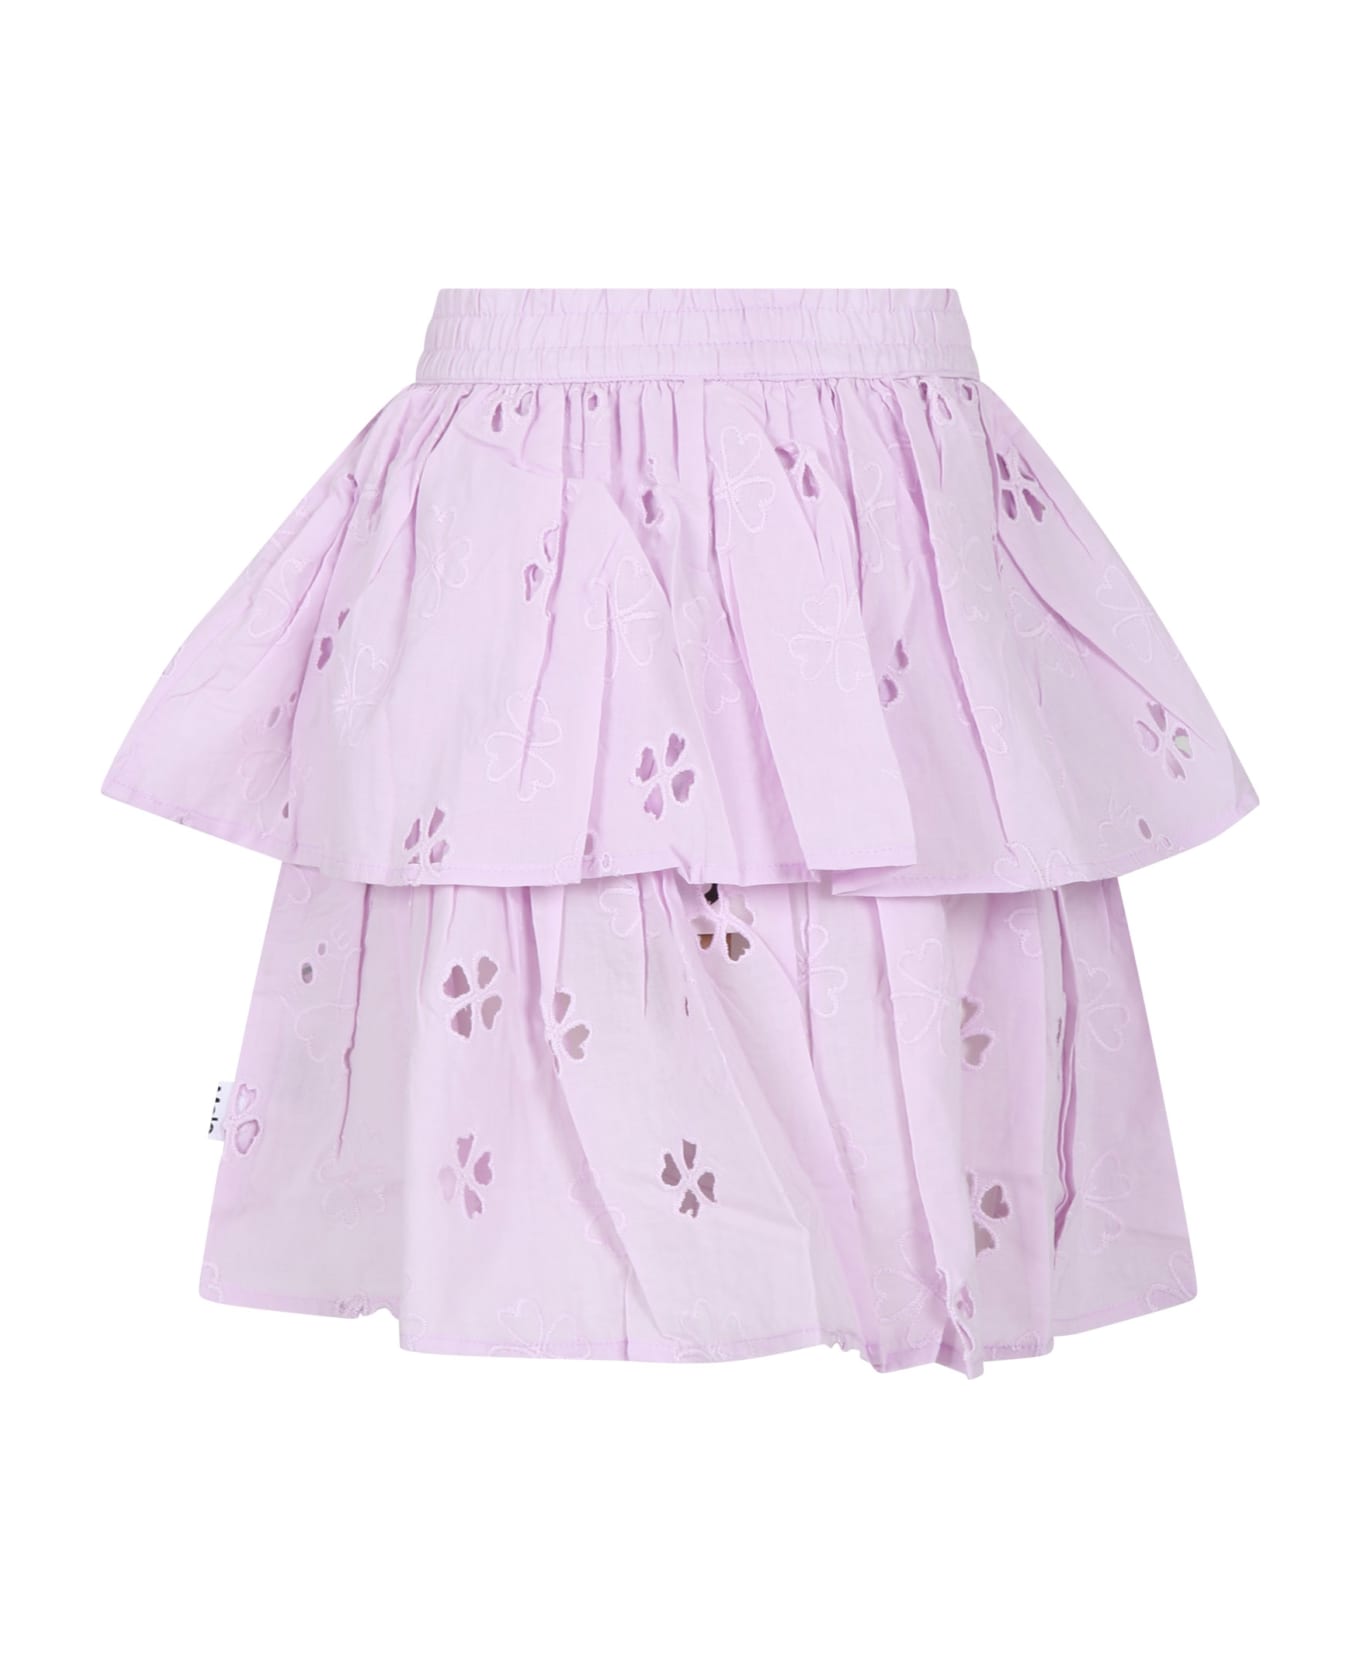 Molo Pink Casual Skirt For Girl With Macramé Lace - Pink